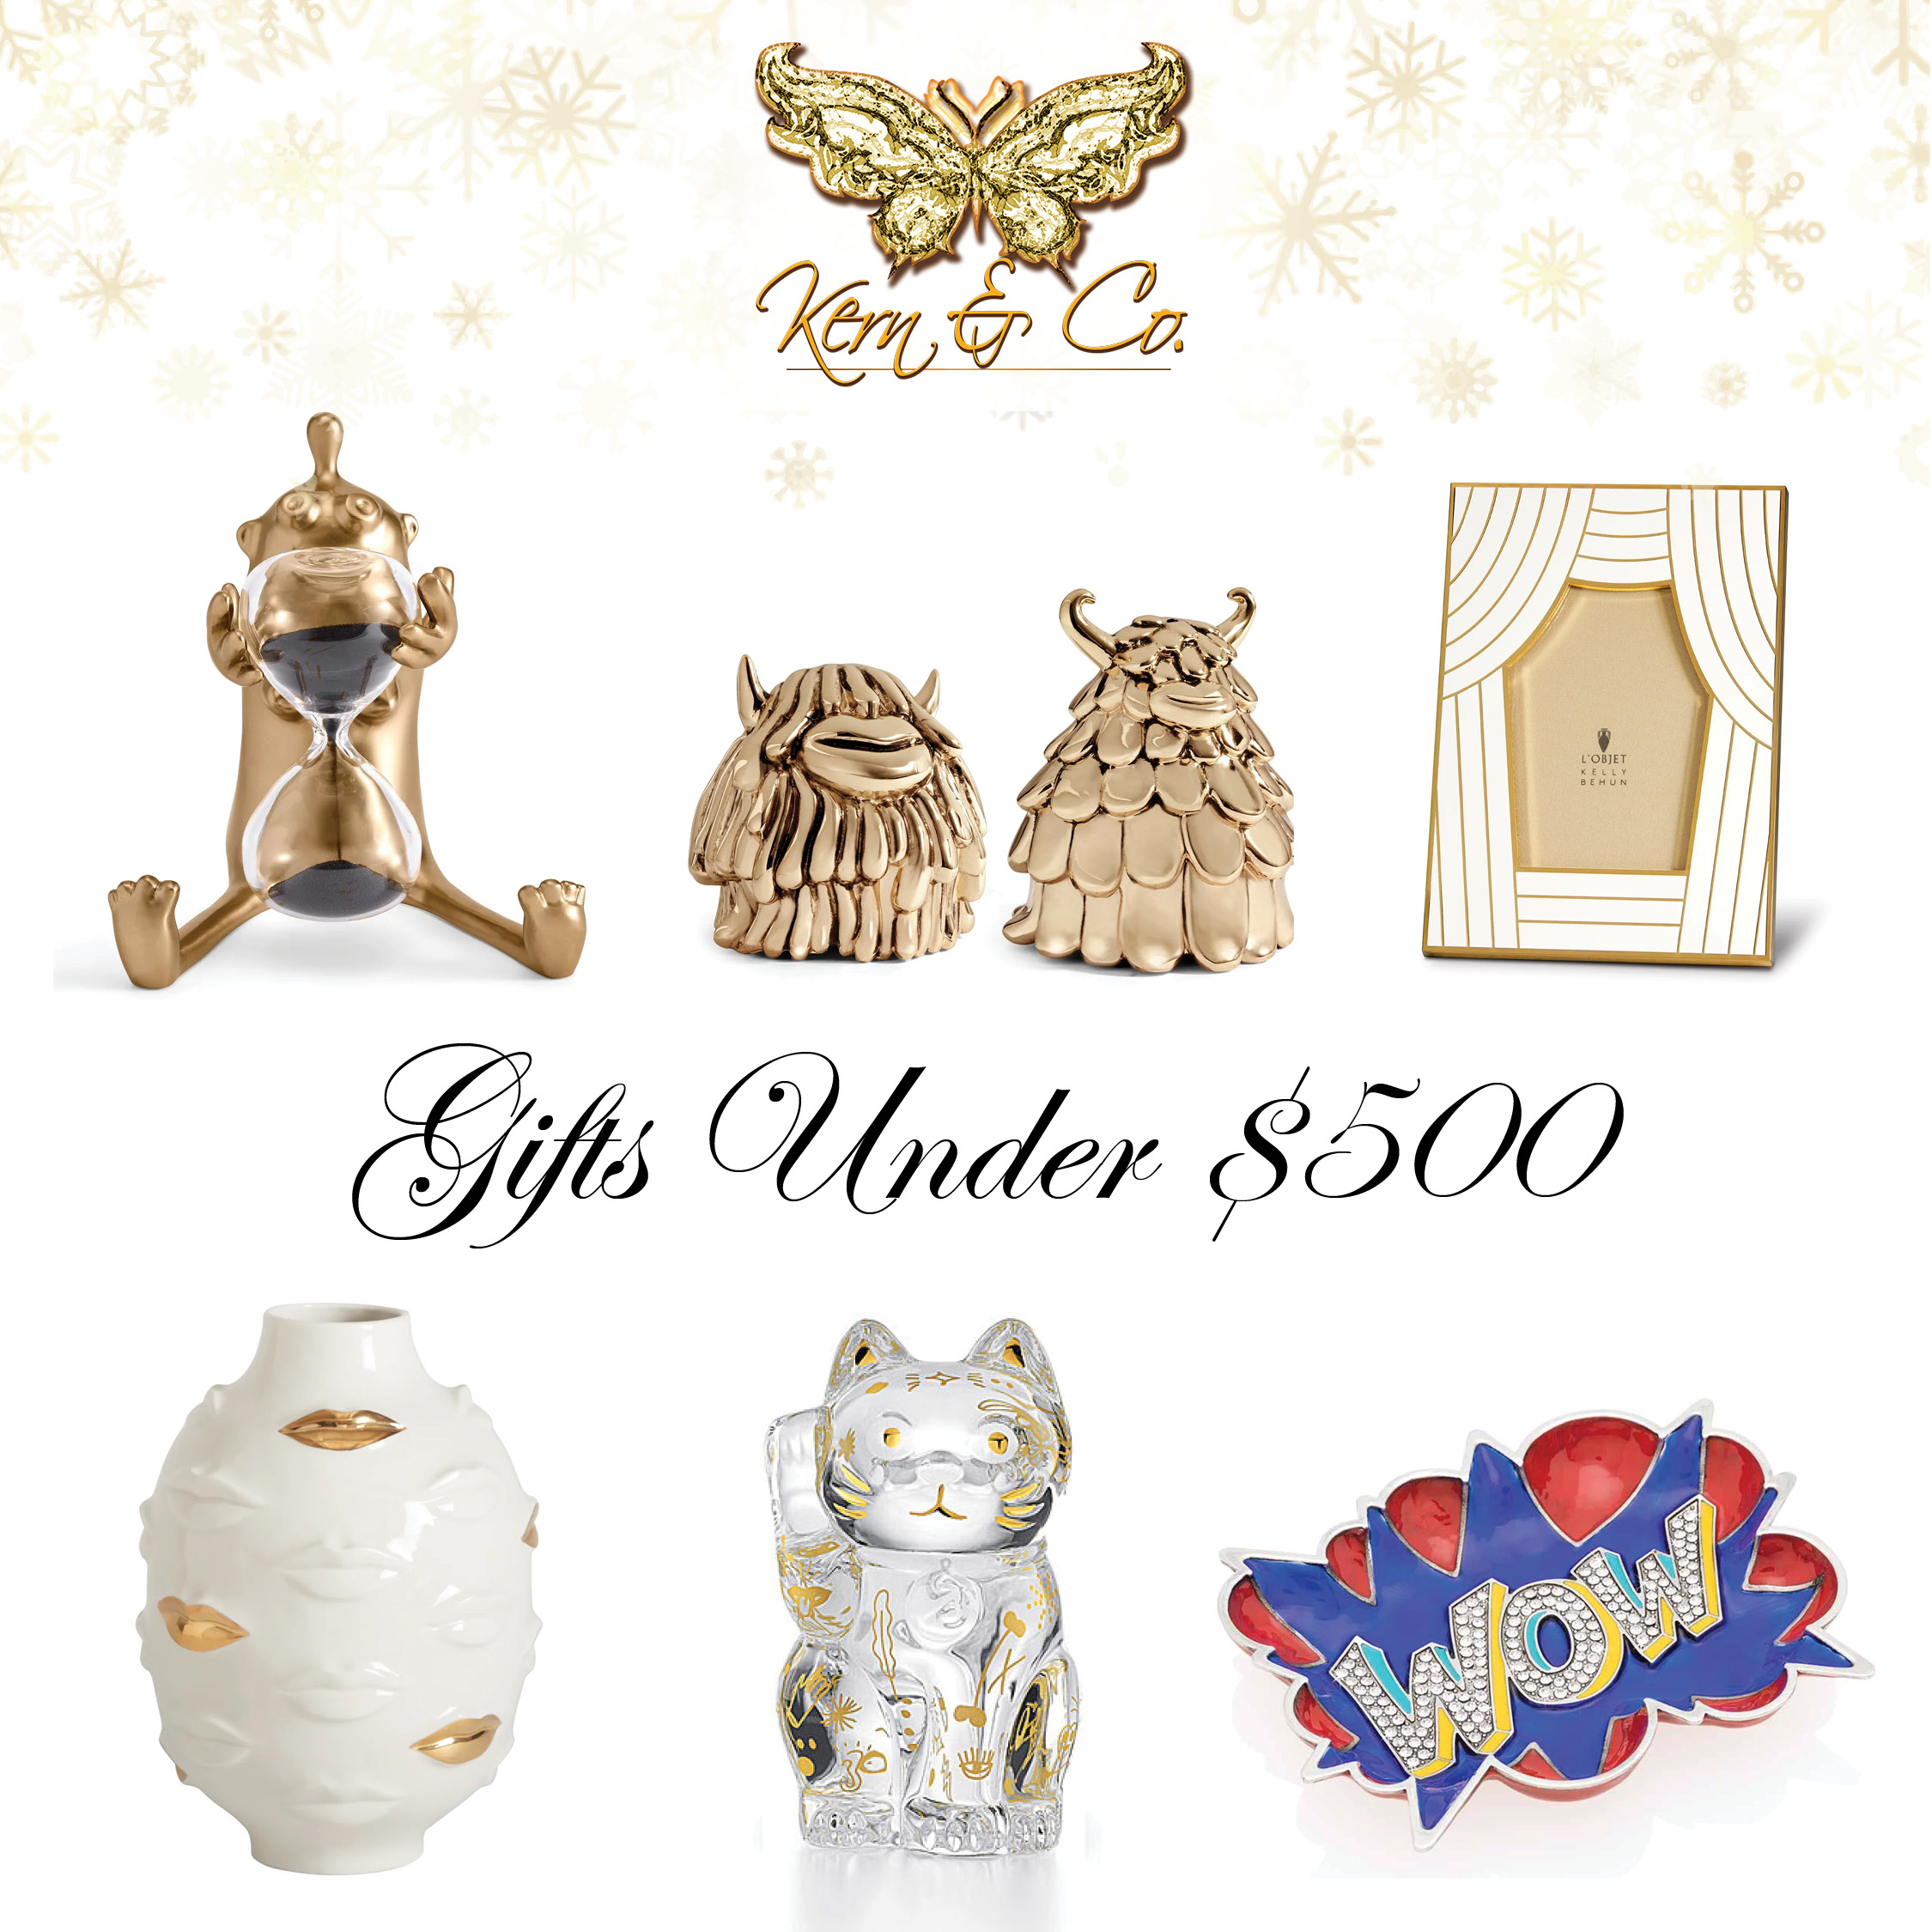 Luxury Gifts & Home Decor Gifts, Gift Ideas